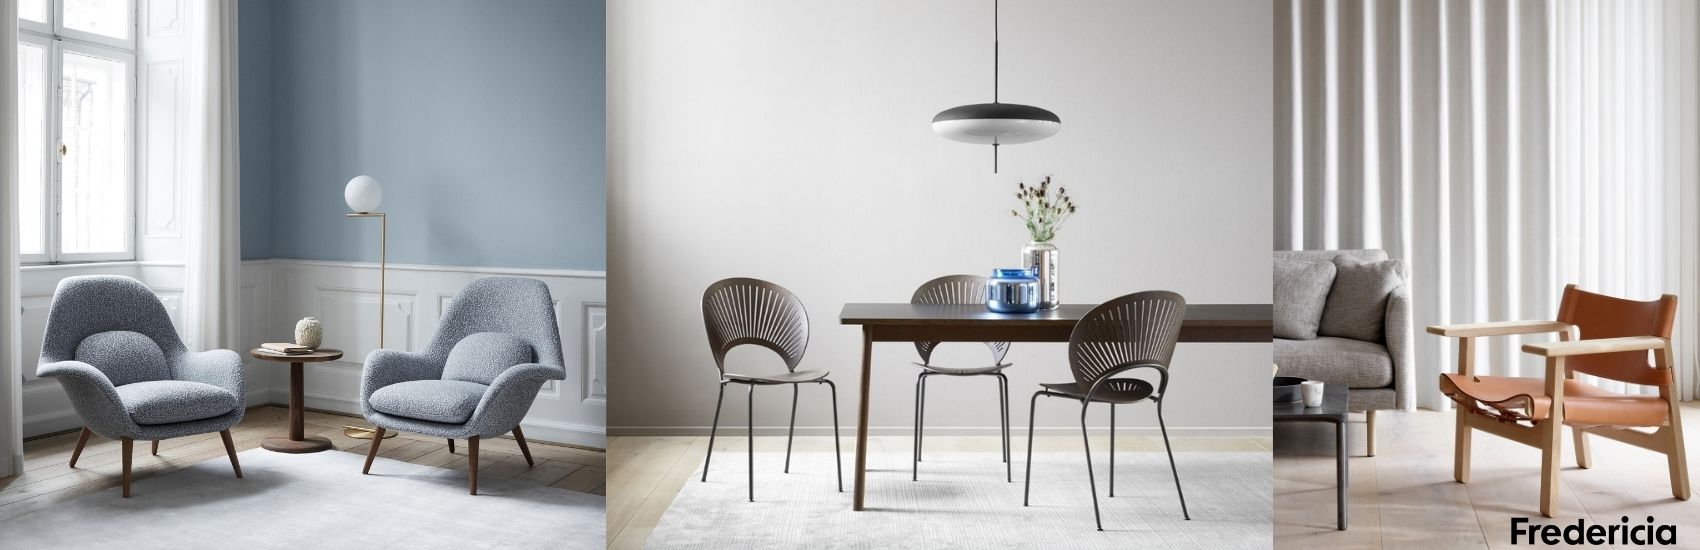 Shop Fredericia Furniture at Palette and Parlor